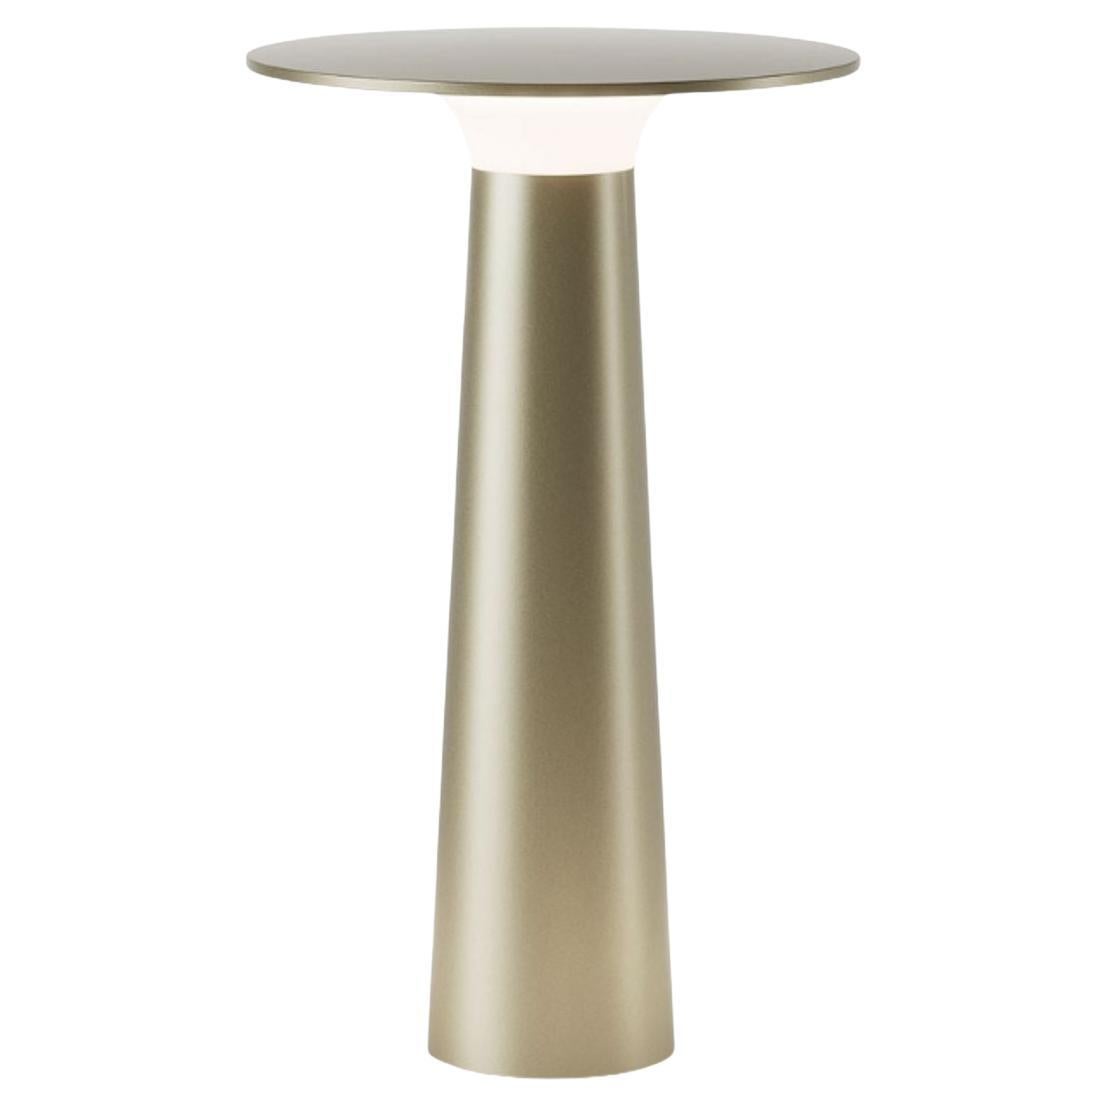 Contemporary Klaus Nolting 'Lix' Portable Outdoor Aluminum Table Lamp in Sage for IP44de For Sale